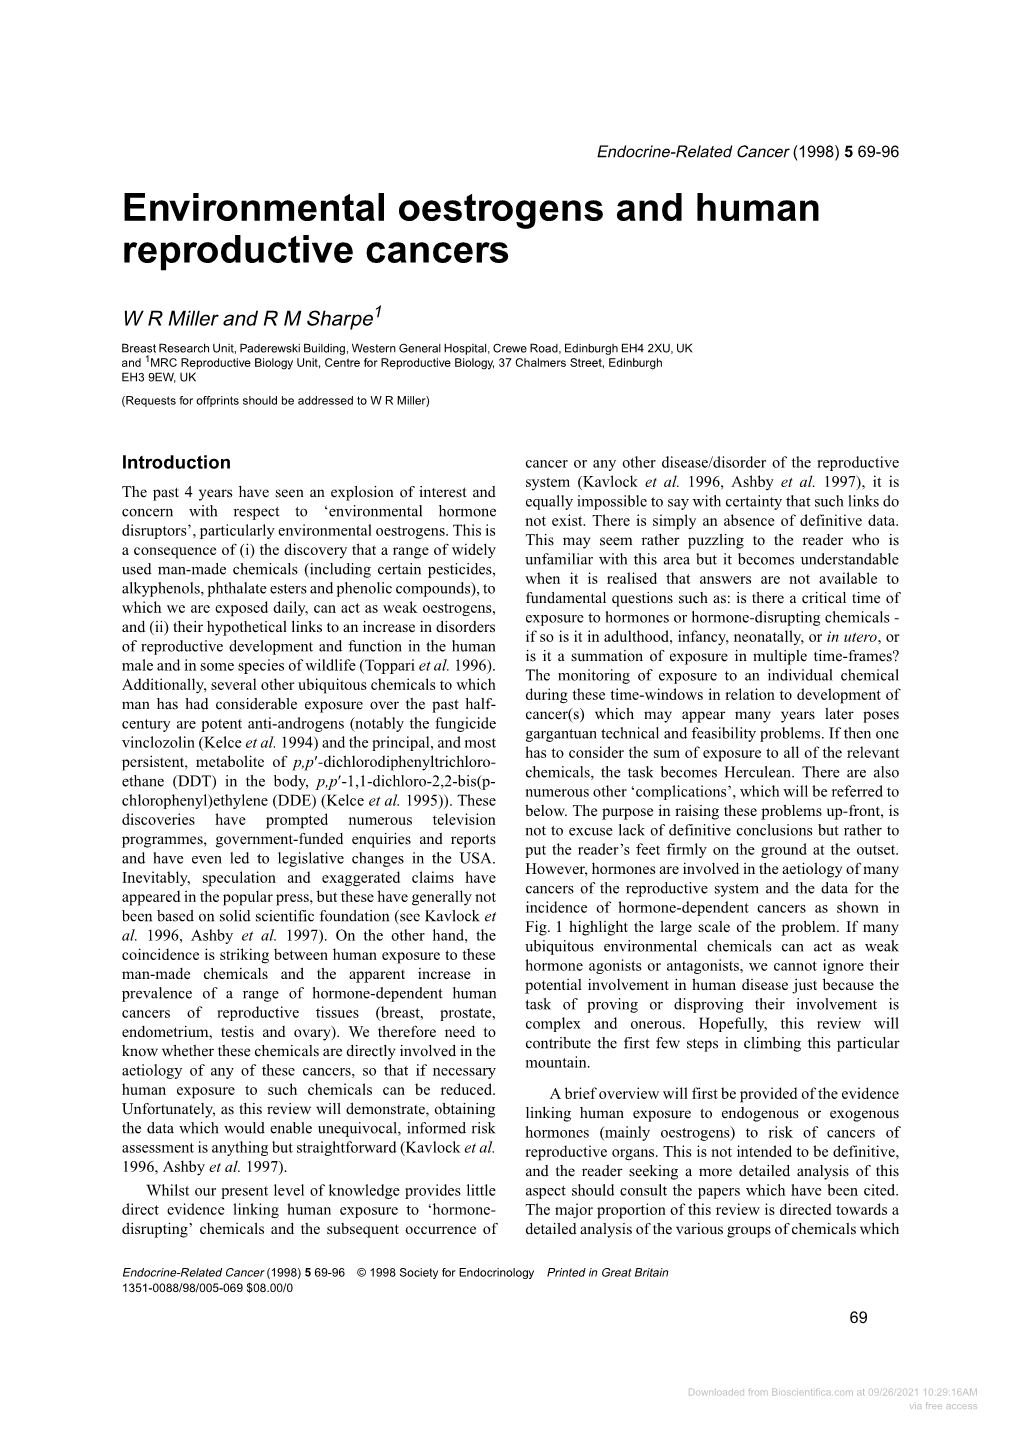 Environmental Oestrogens and Human Reproductive Cancers